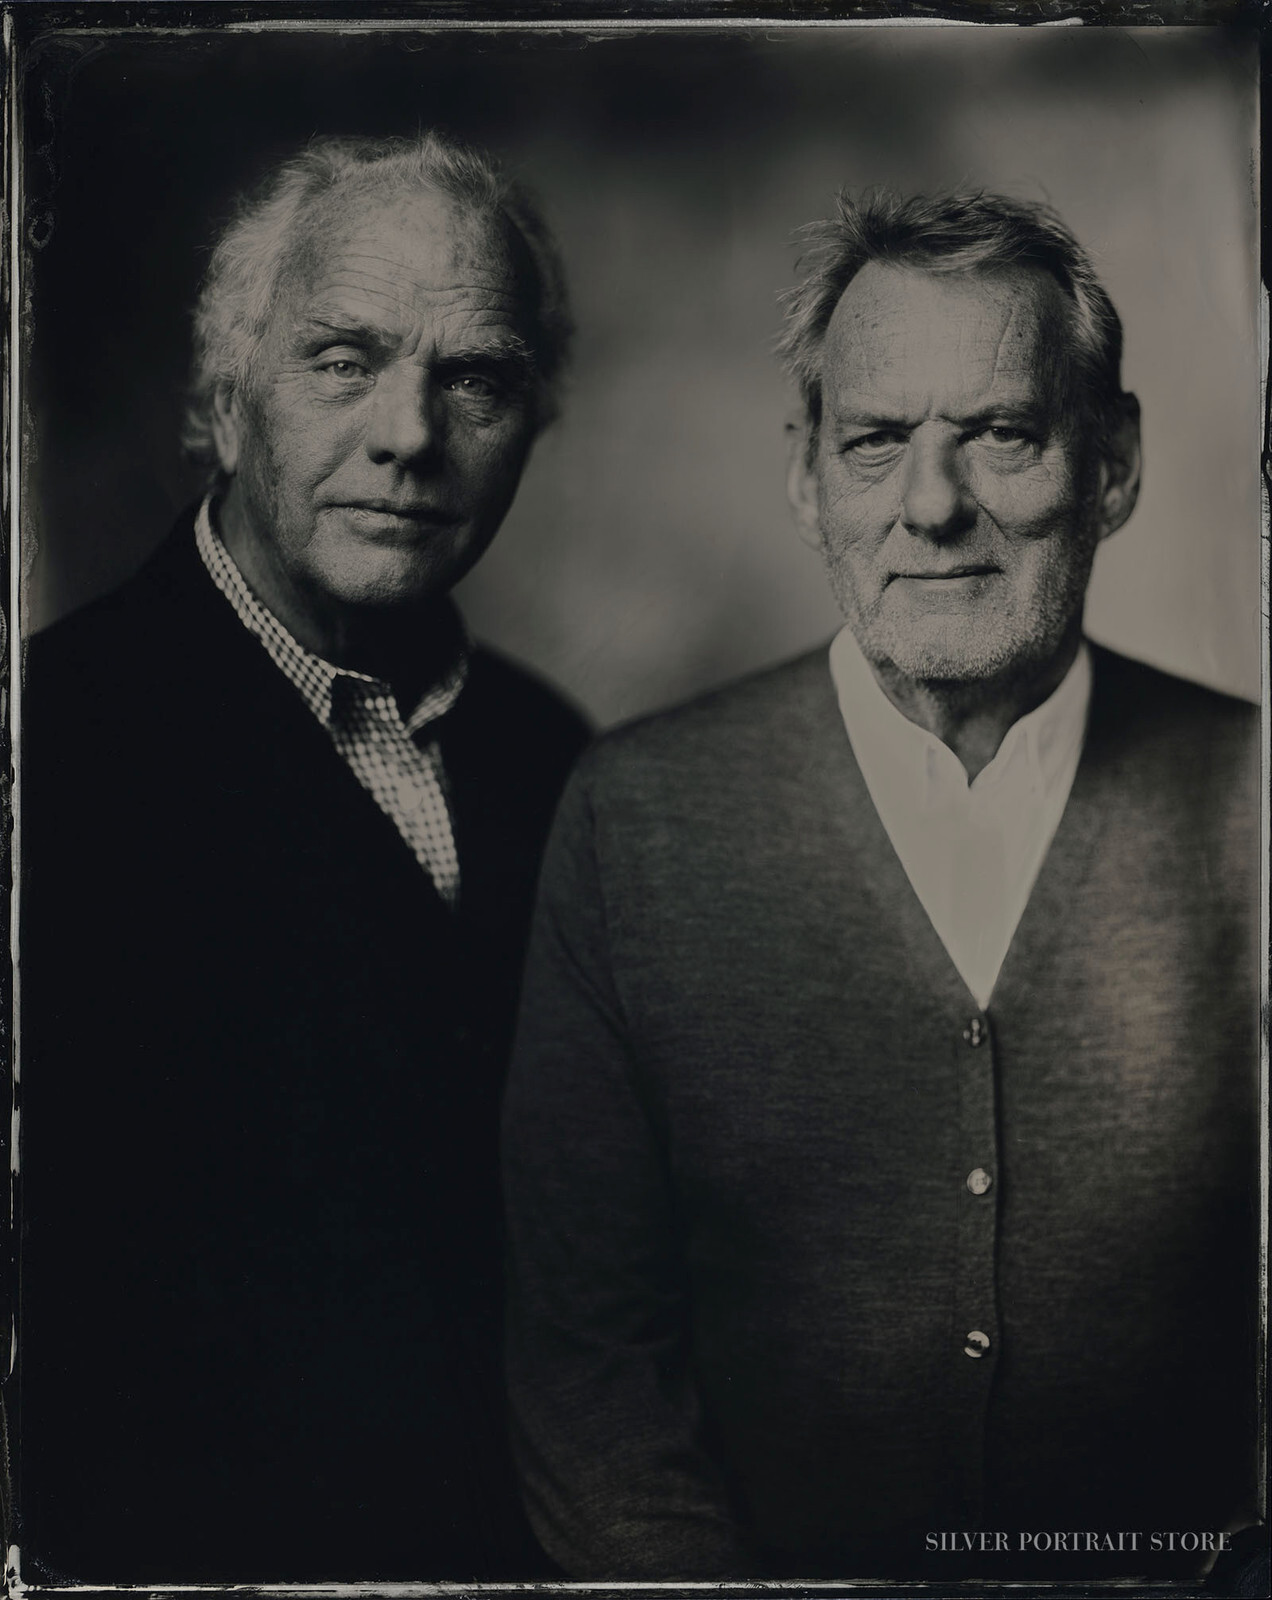 Sandor & Hans-Silver Portrait Store-scan from Wet plate collodion-Tintype 20 x 25 cm.